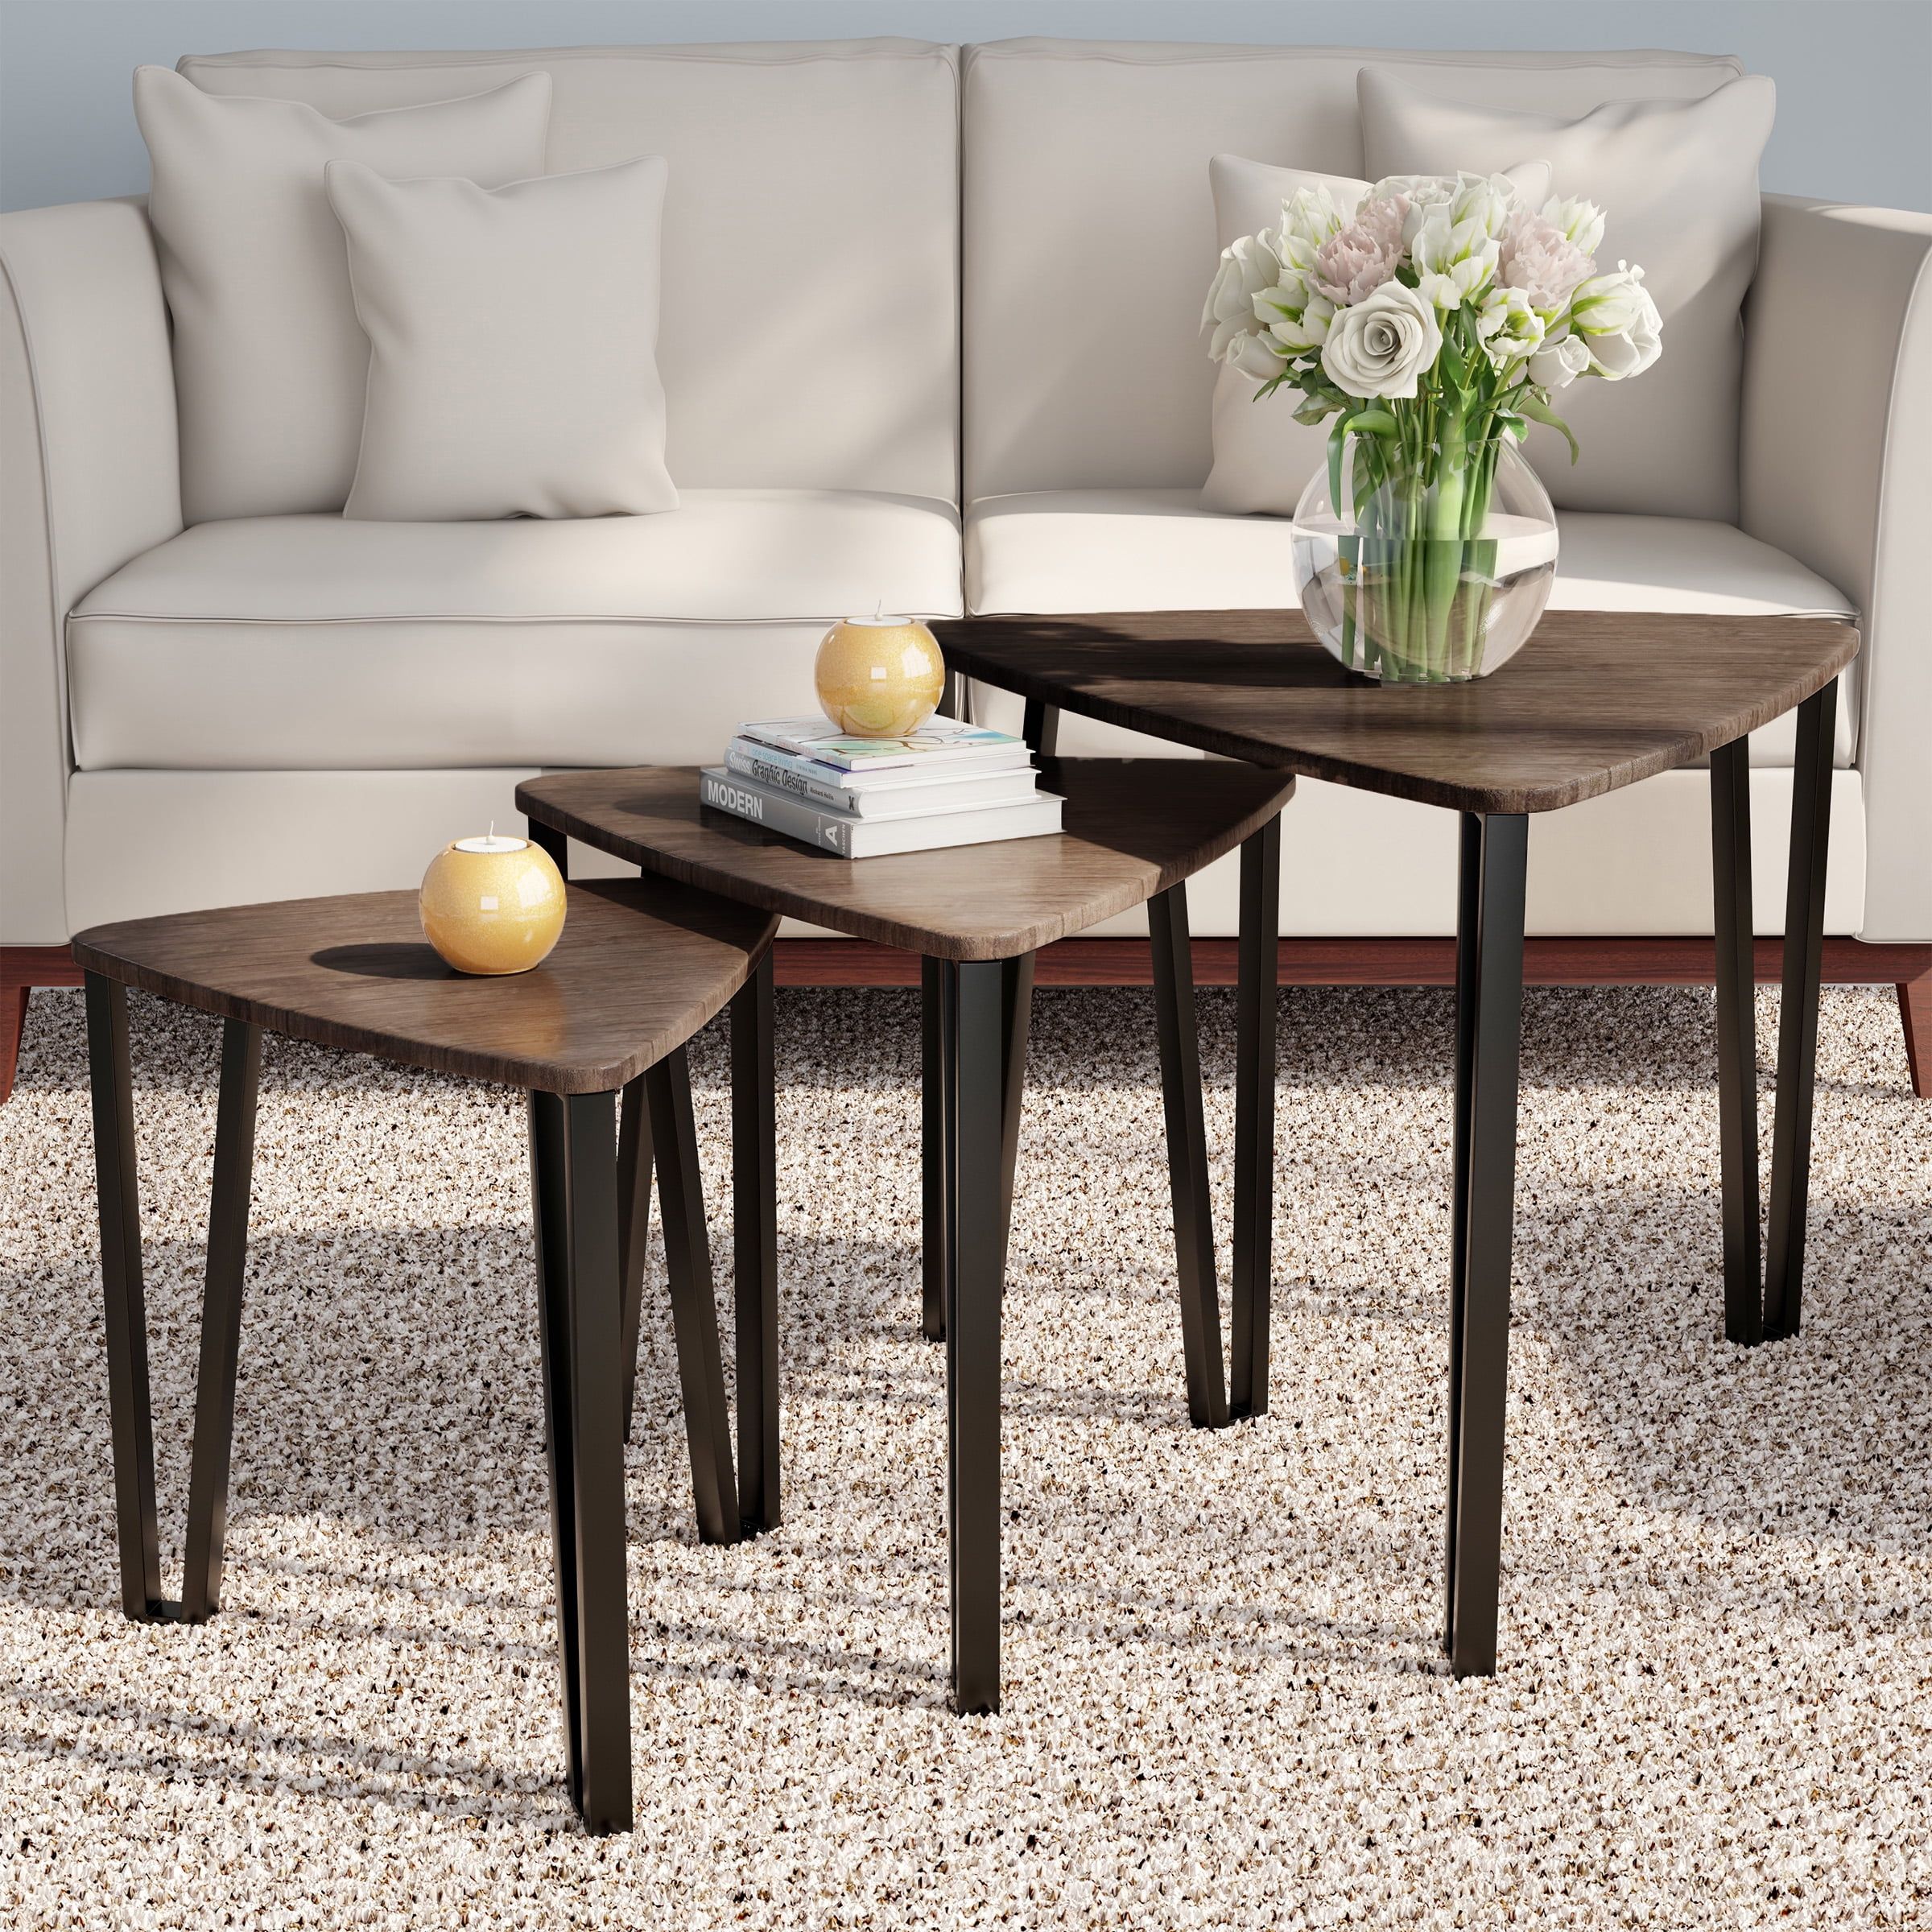 Nesting Tables Set Of 3 Modern Woodgrain Look For Living Room Coffee Regarding Coffee Tables Of 3 Nesting Tables (View 7 of 15)